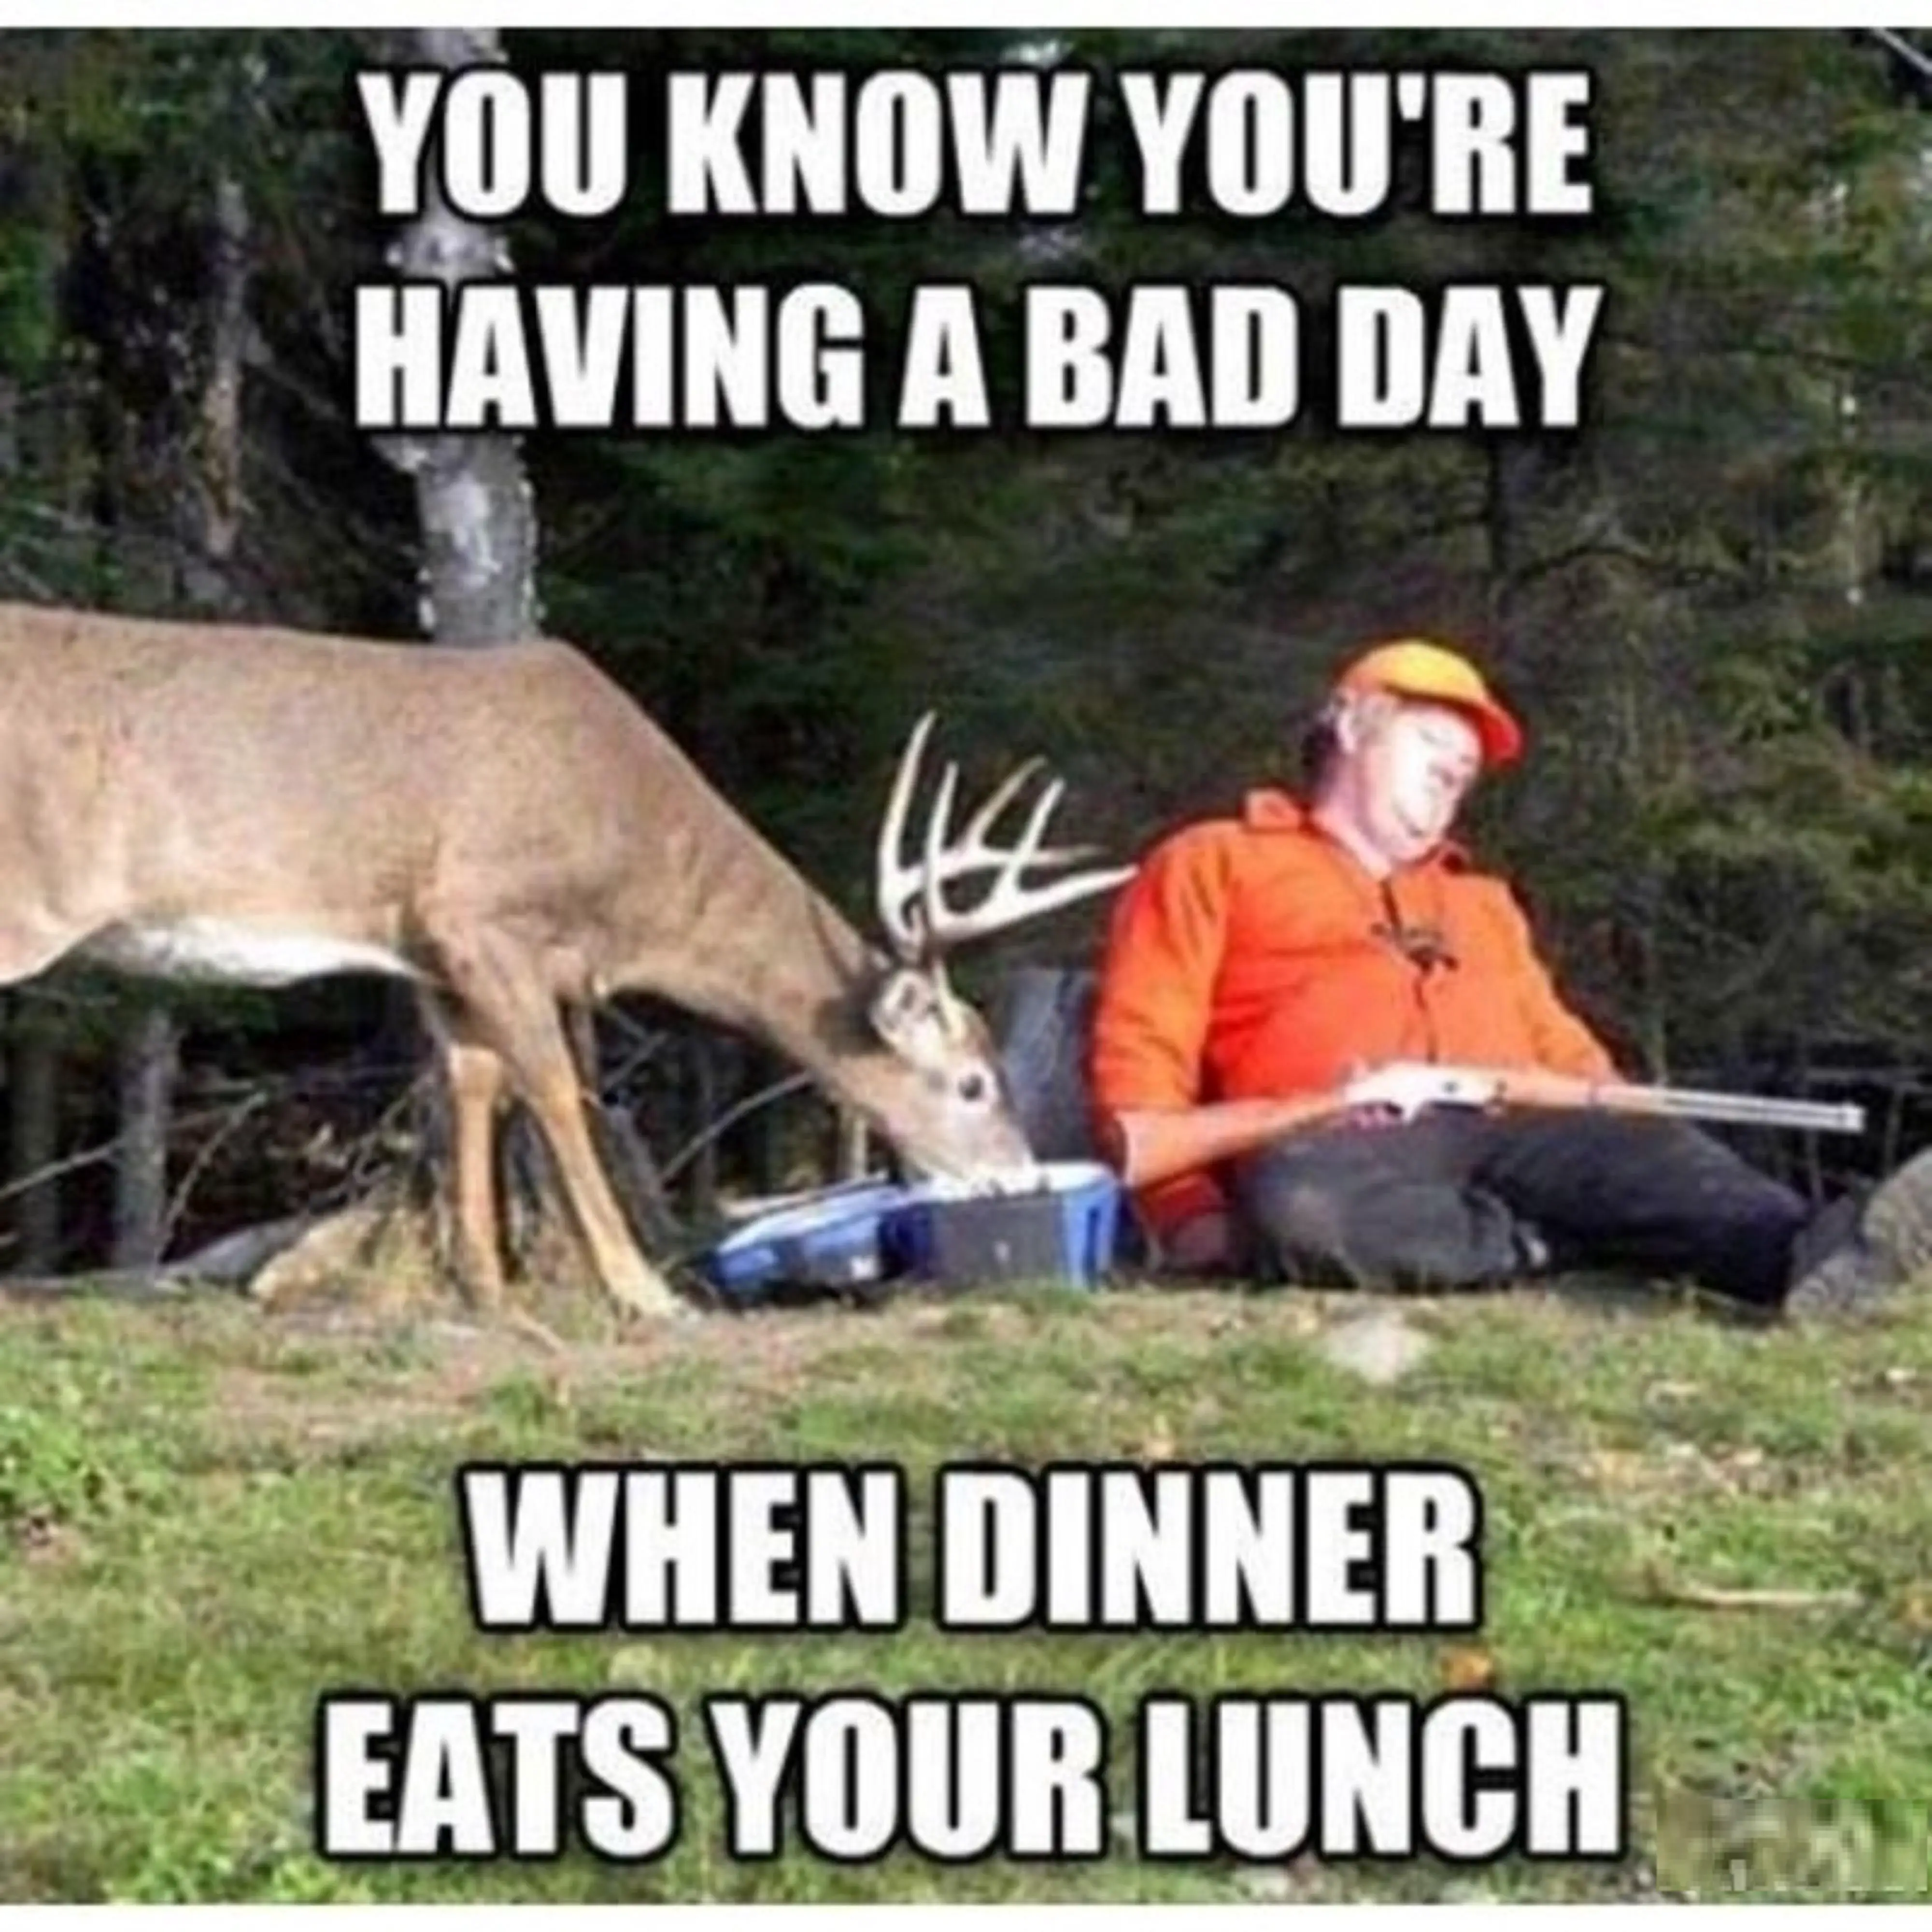 Funny animal picture of a deer eating a sleeping hunter's lunch. helpf...